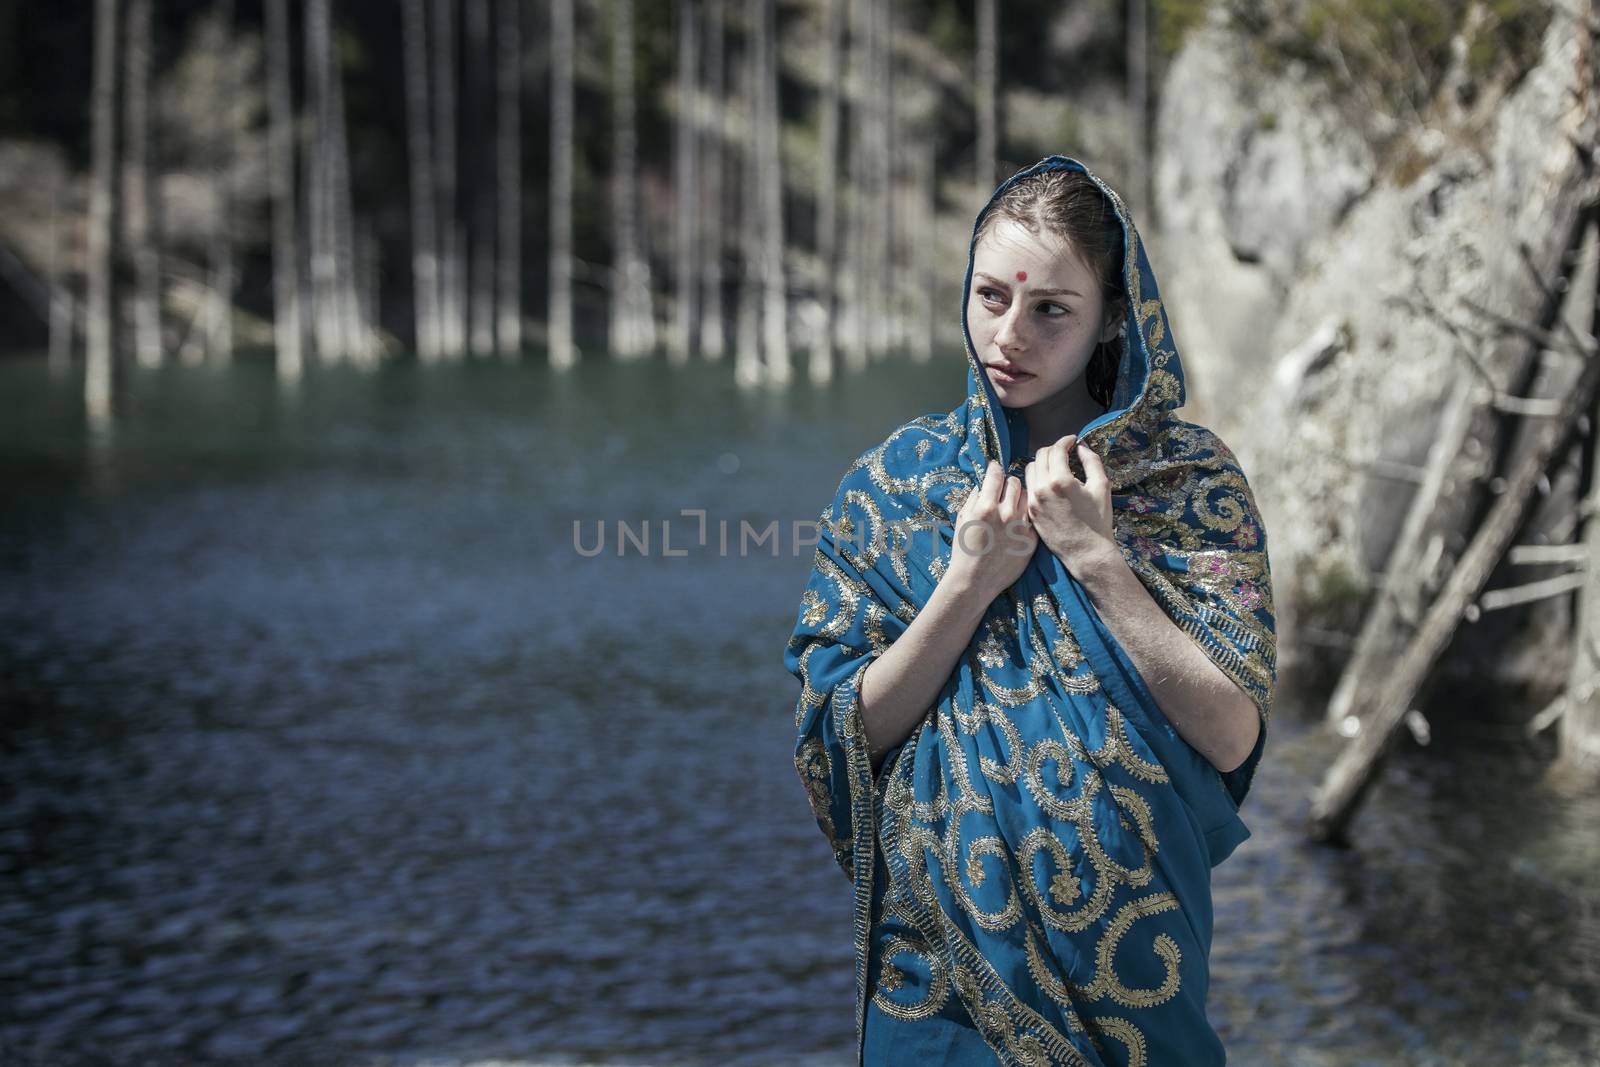 The girl of the European appearance poses in the Indian sari at Kaindy lake